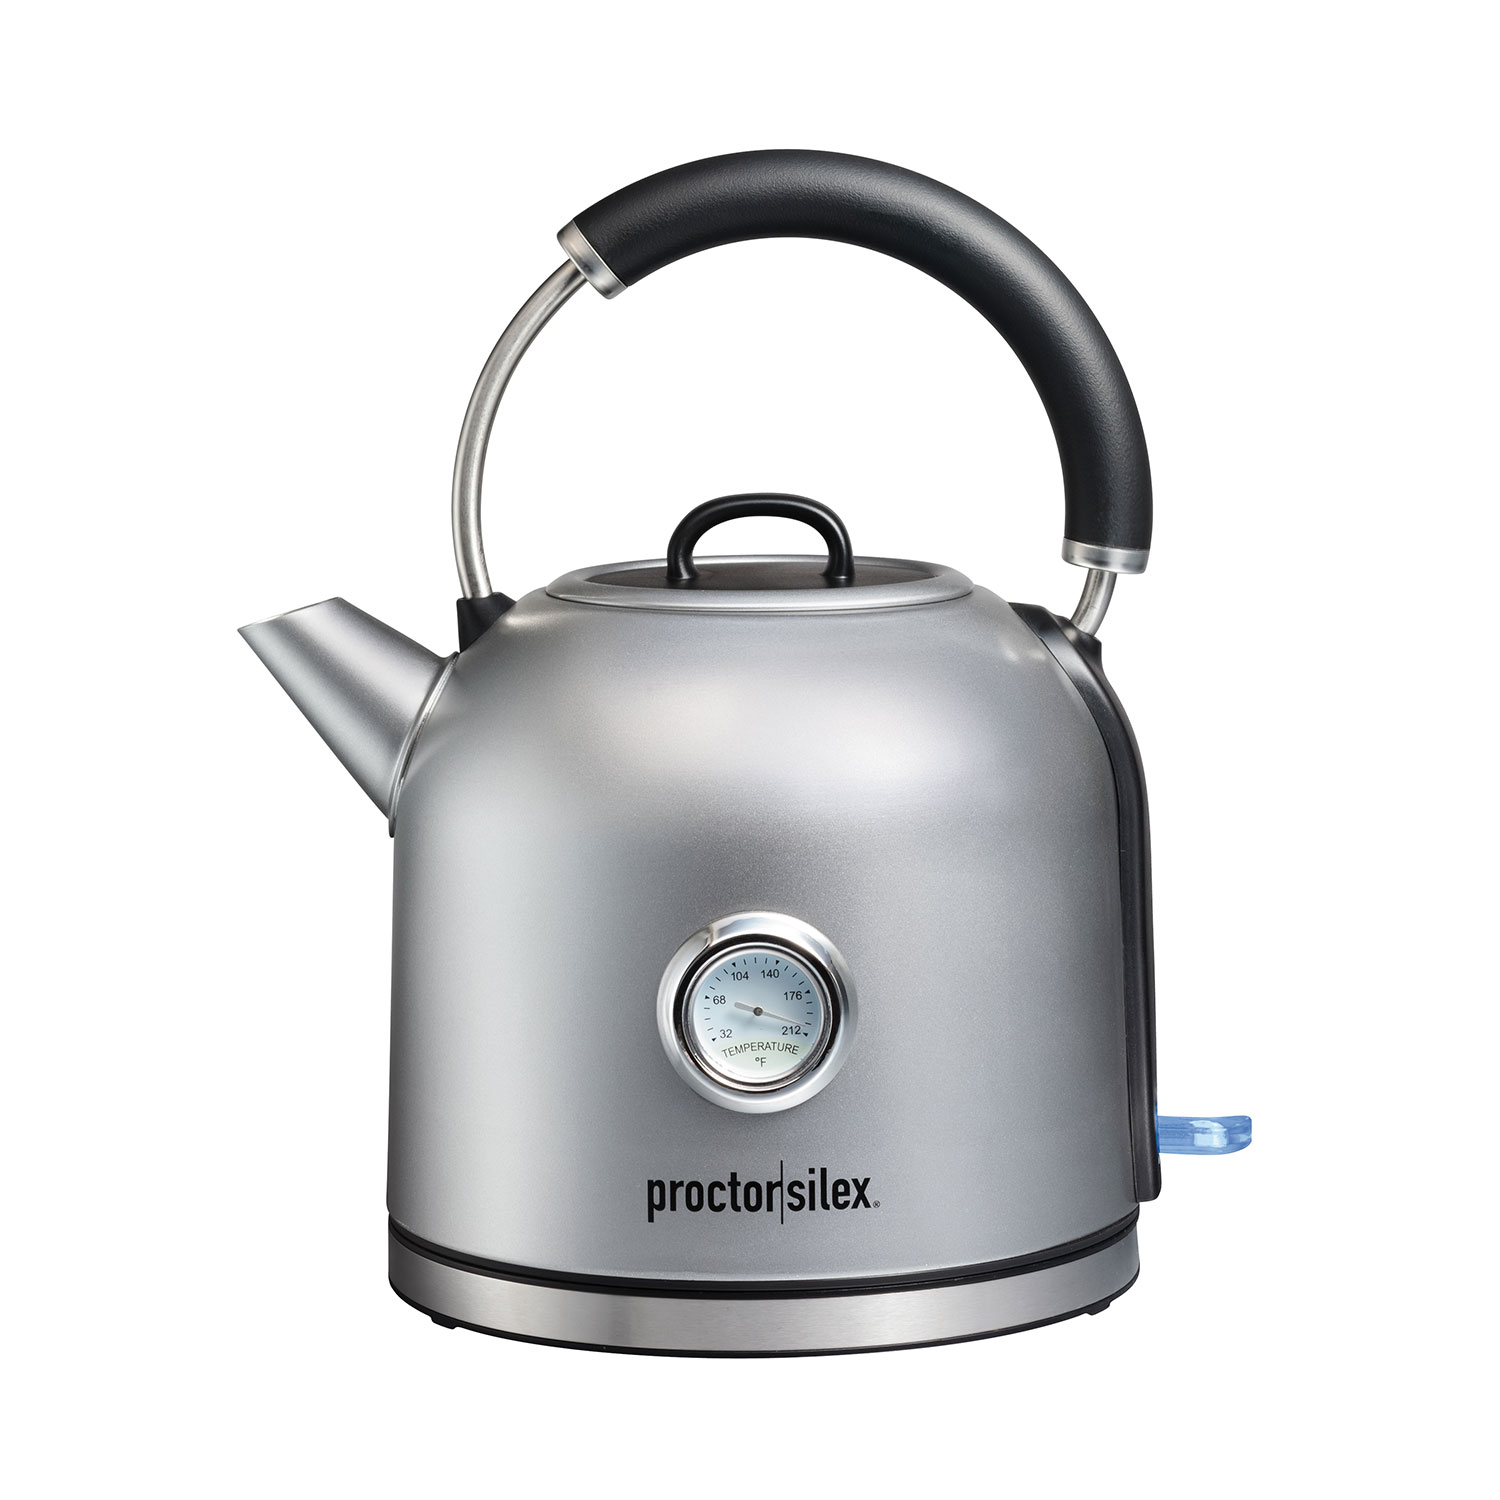 1.7 Liter Electric Dome Kettle - 41035 Small Size